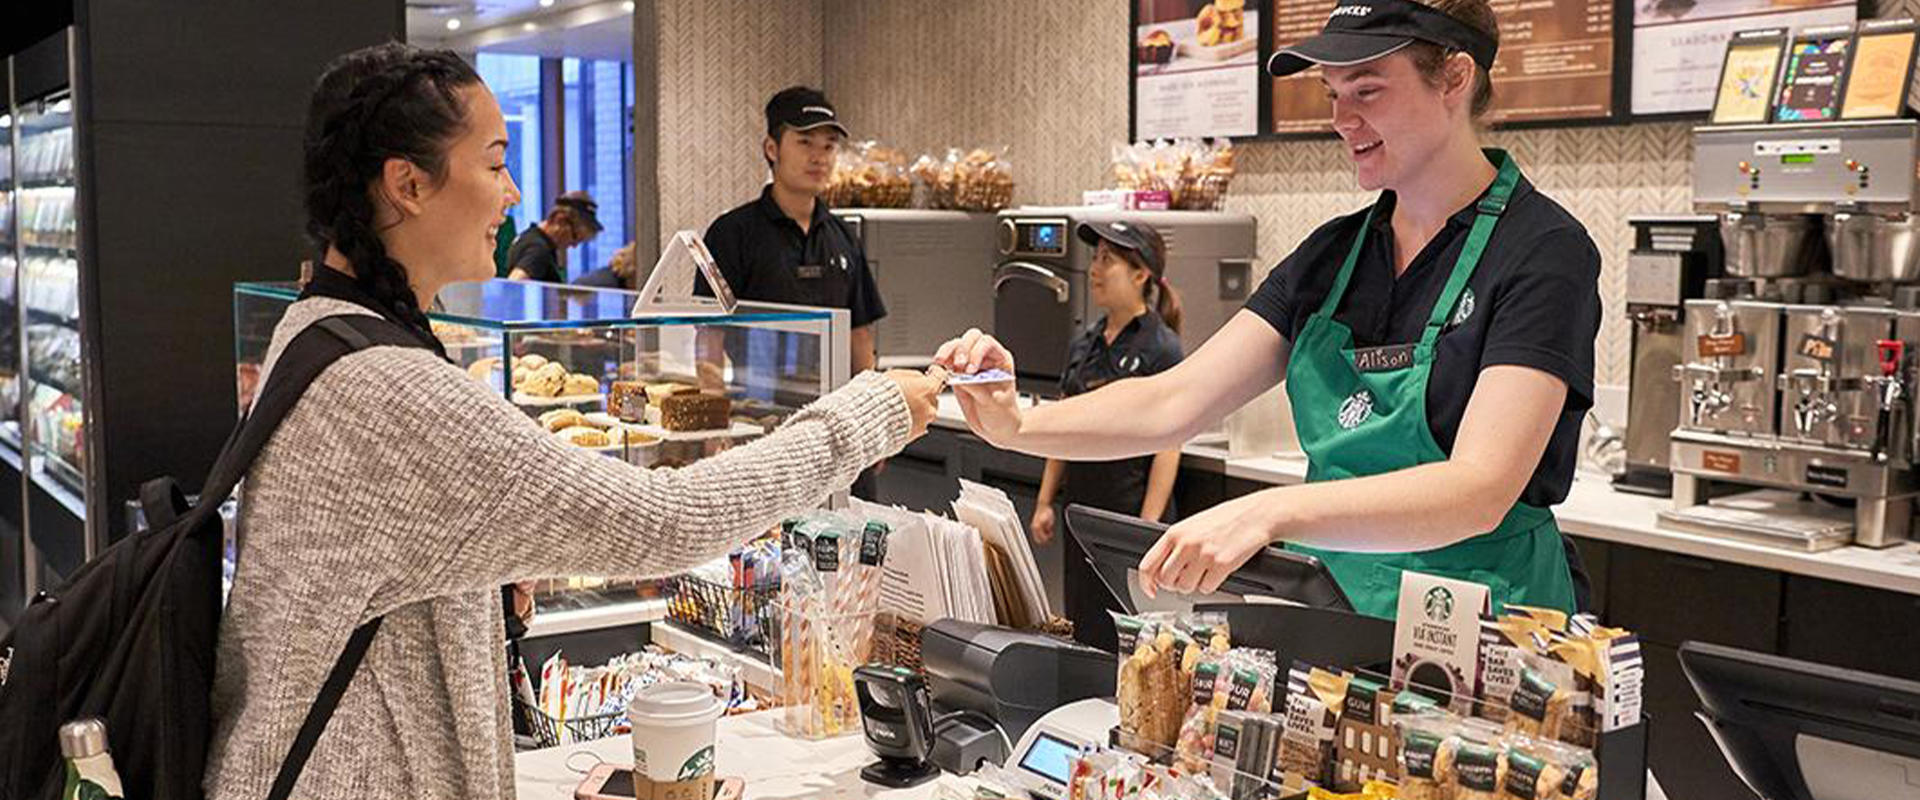 A student "swipes out hunger" at Starbucks witth her meal plan card